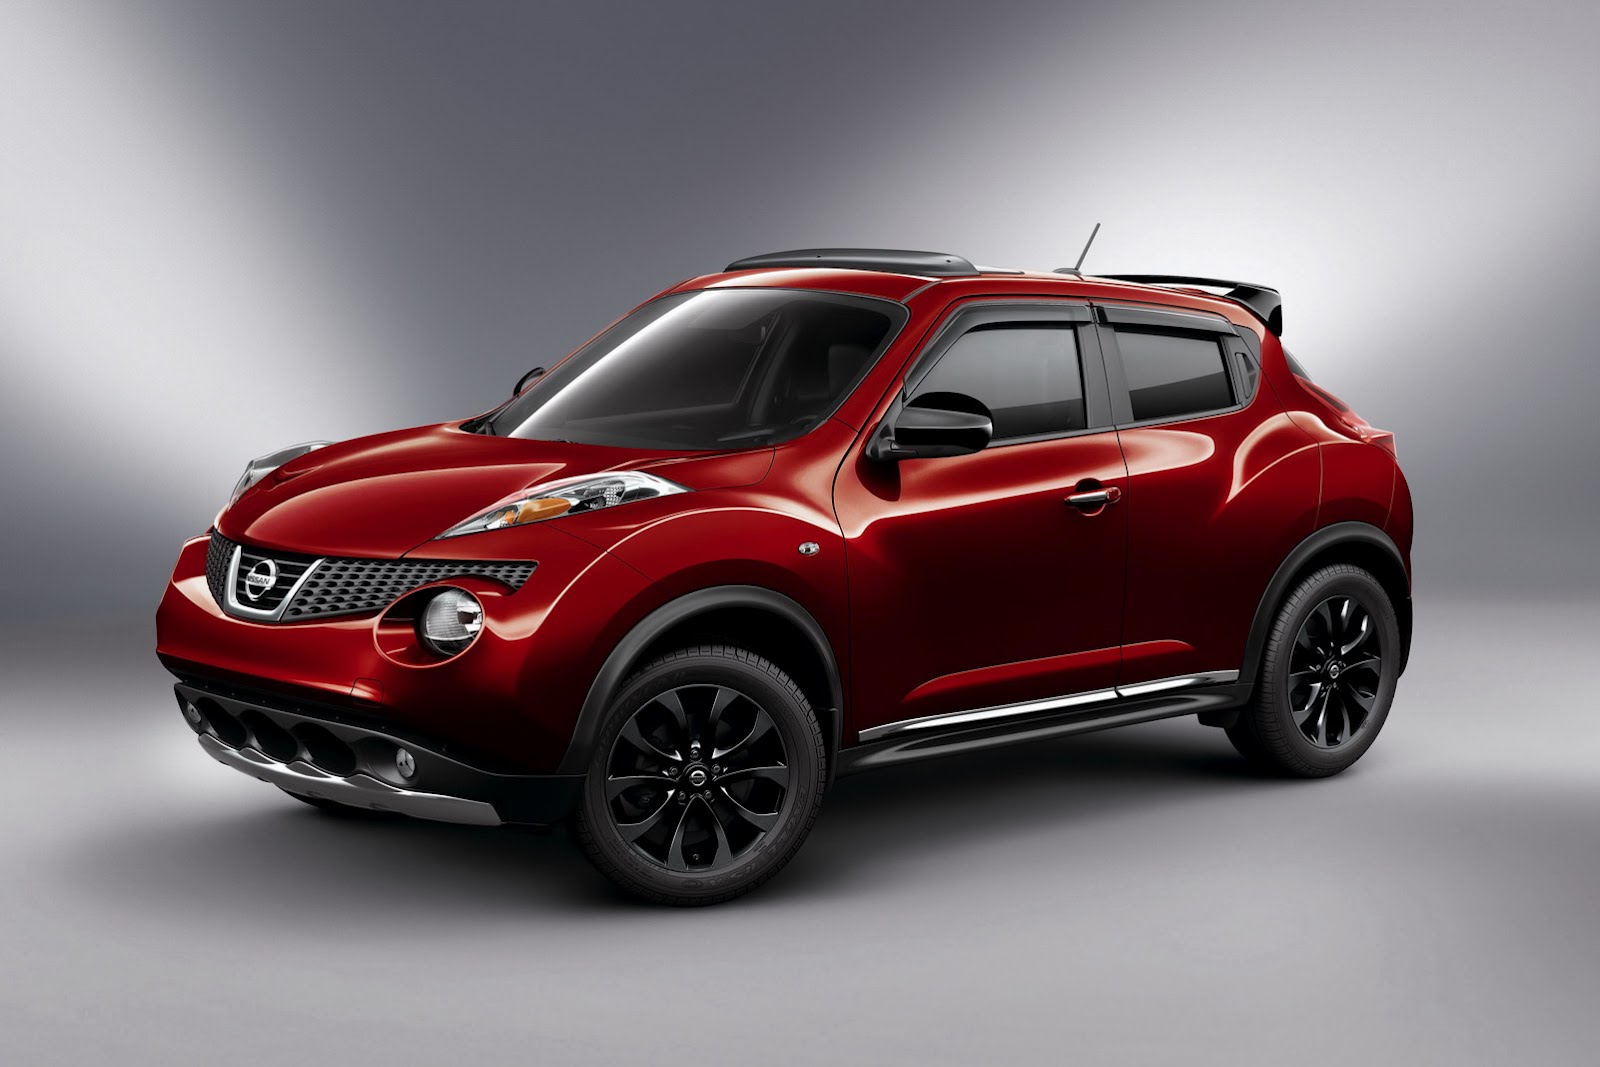 Pictures of the juke nissan #6